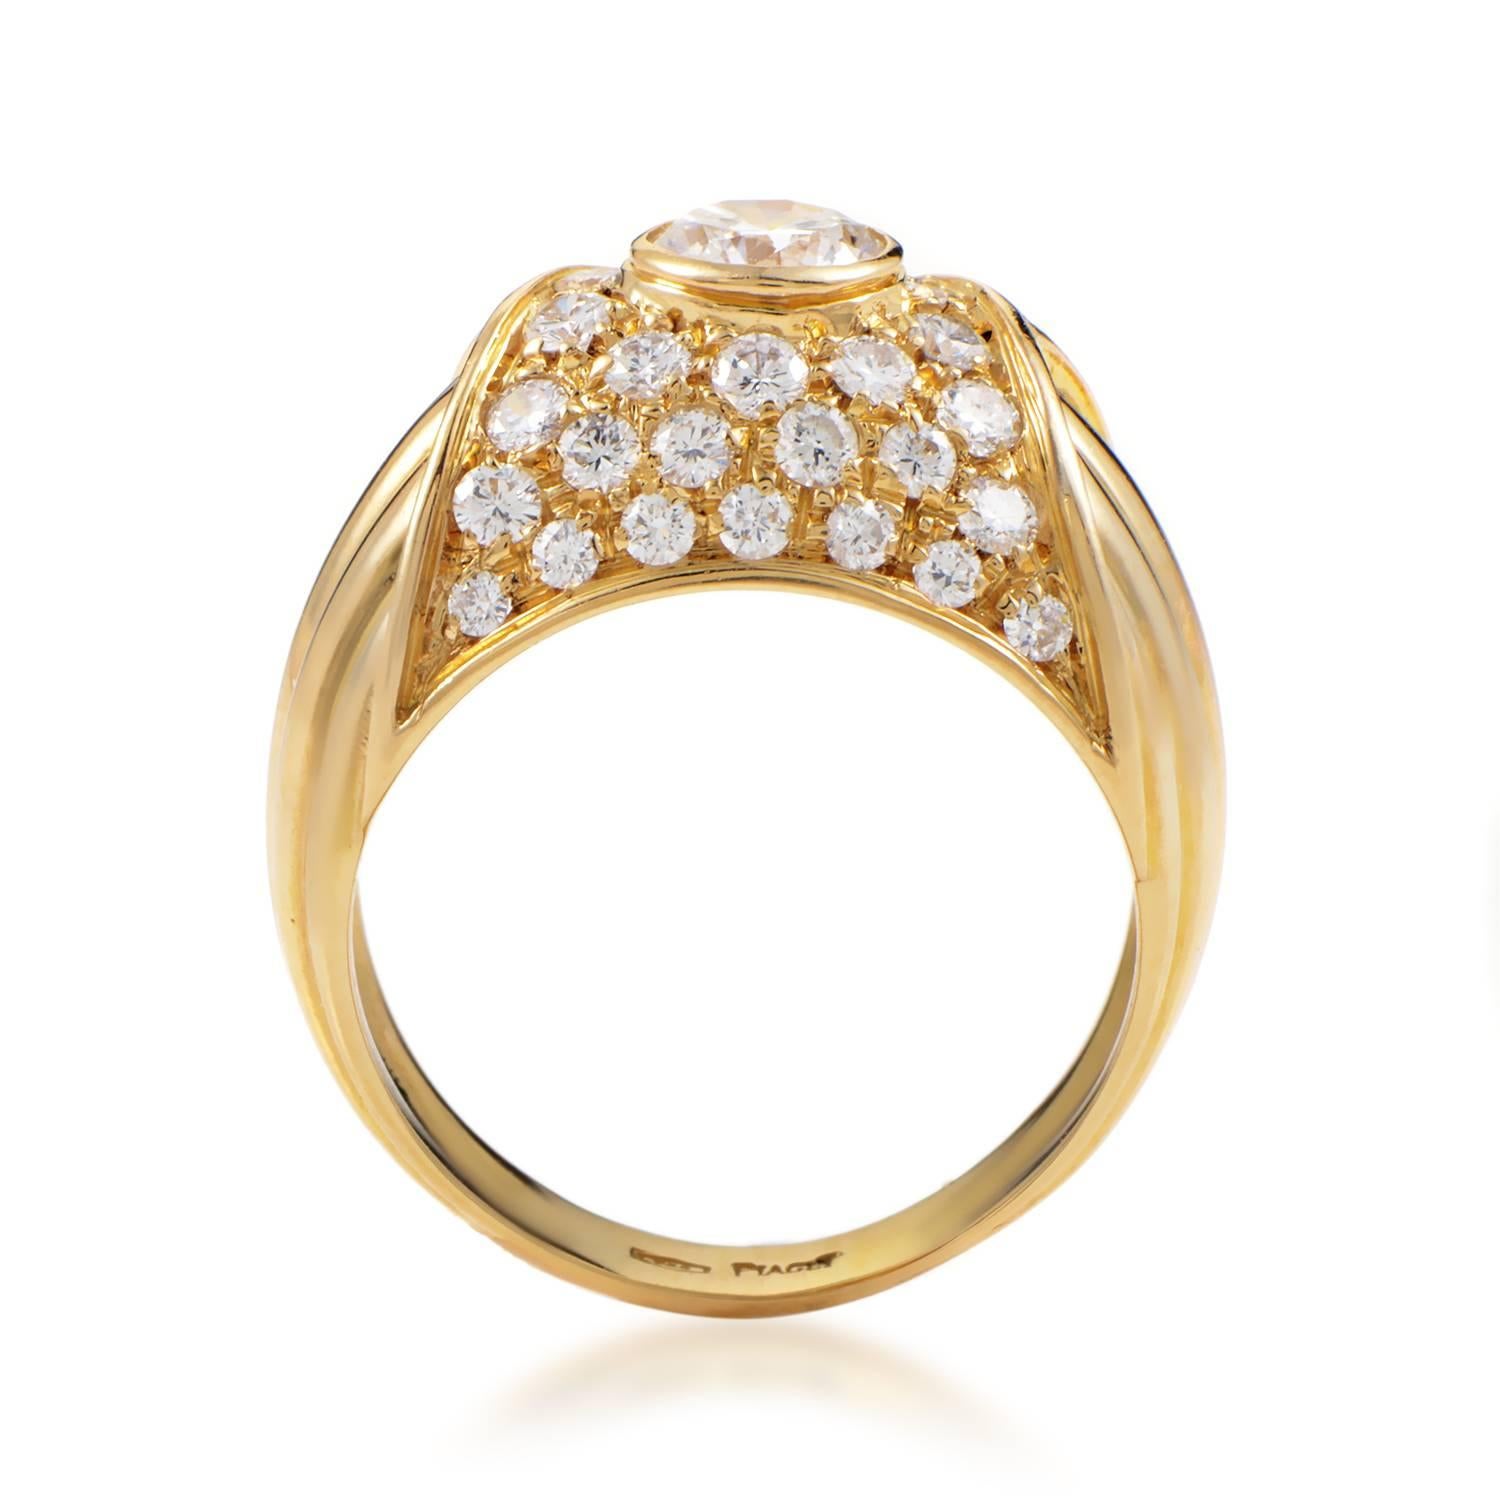 A sight of pure luxury and resplendent brilliance, this dazzling ring from Piaget employs the fabulous blend of radiant 18K yellow gold and majestically glistening diamonds weighing in total 1.85 carats to produce an eye-catching allure.
Ring Size: